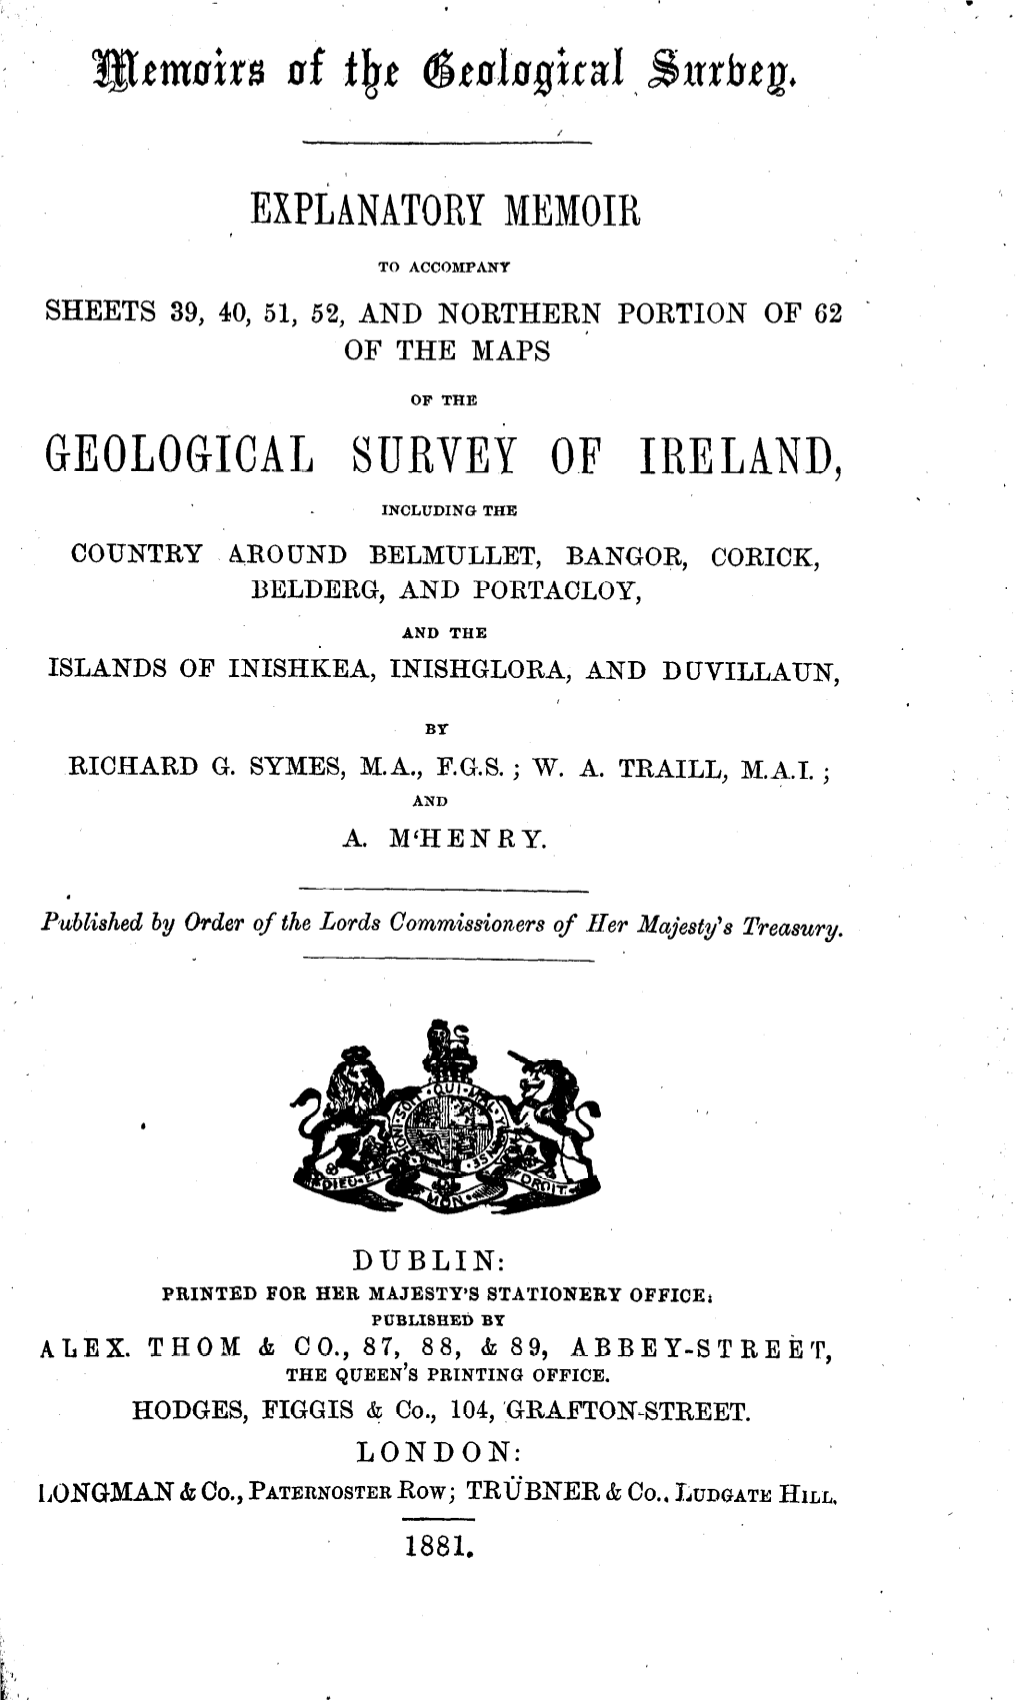 Explanatory Memoir to Accompany Sheets 39,40,51,52 and Northern Portion of 62 of the Maps of the Geological Survey of Ireland E